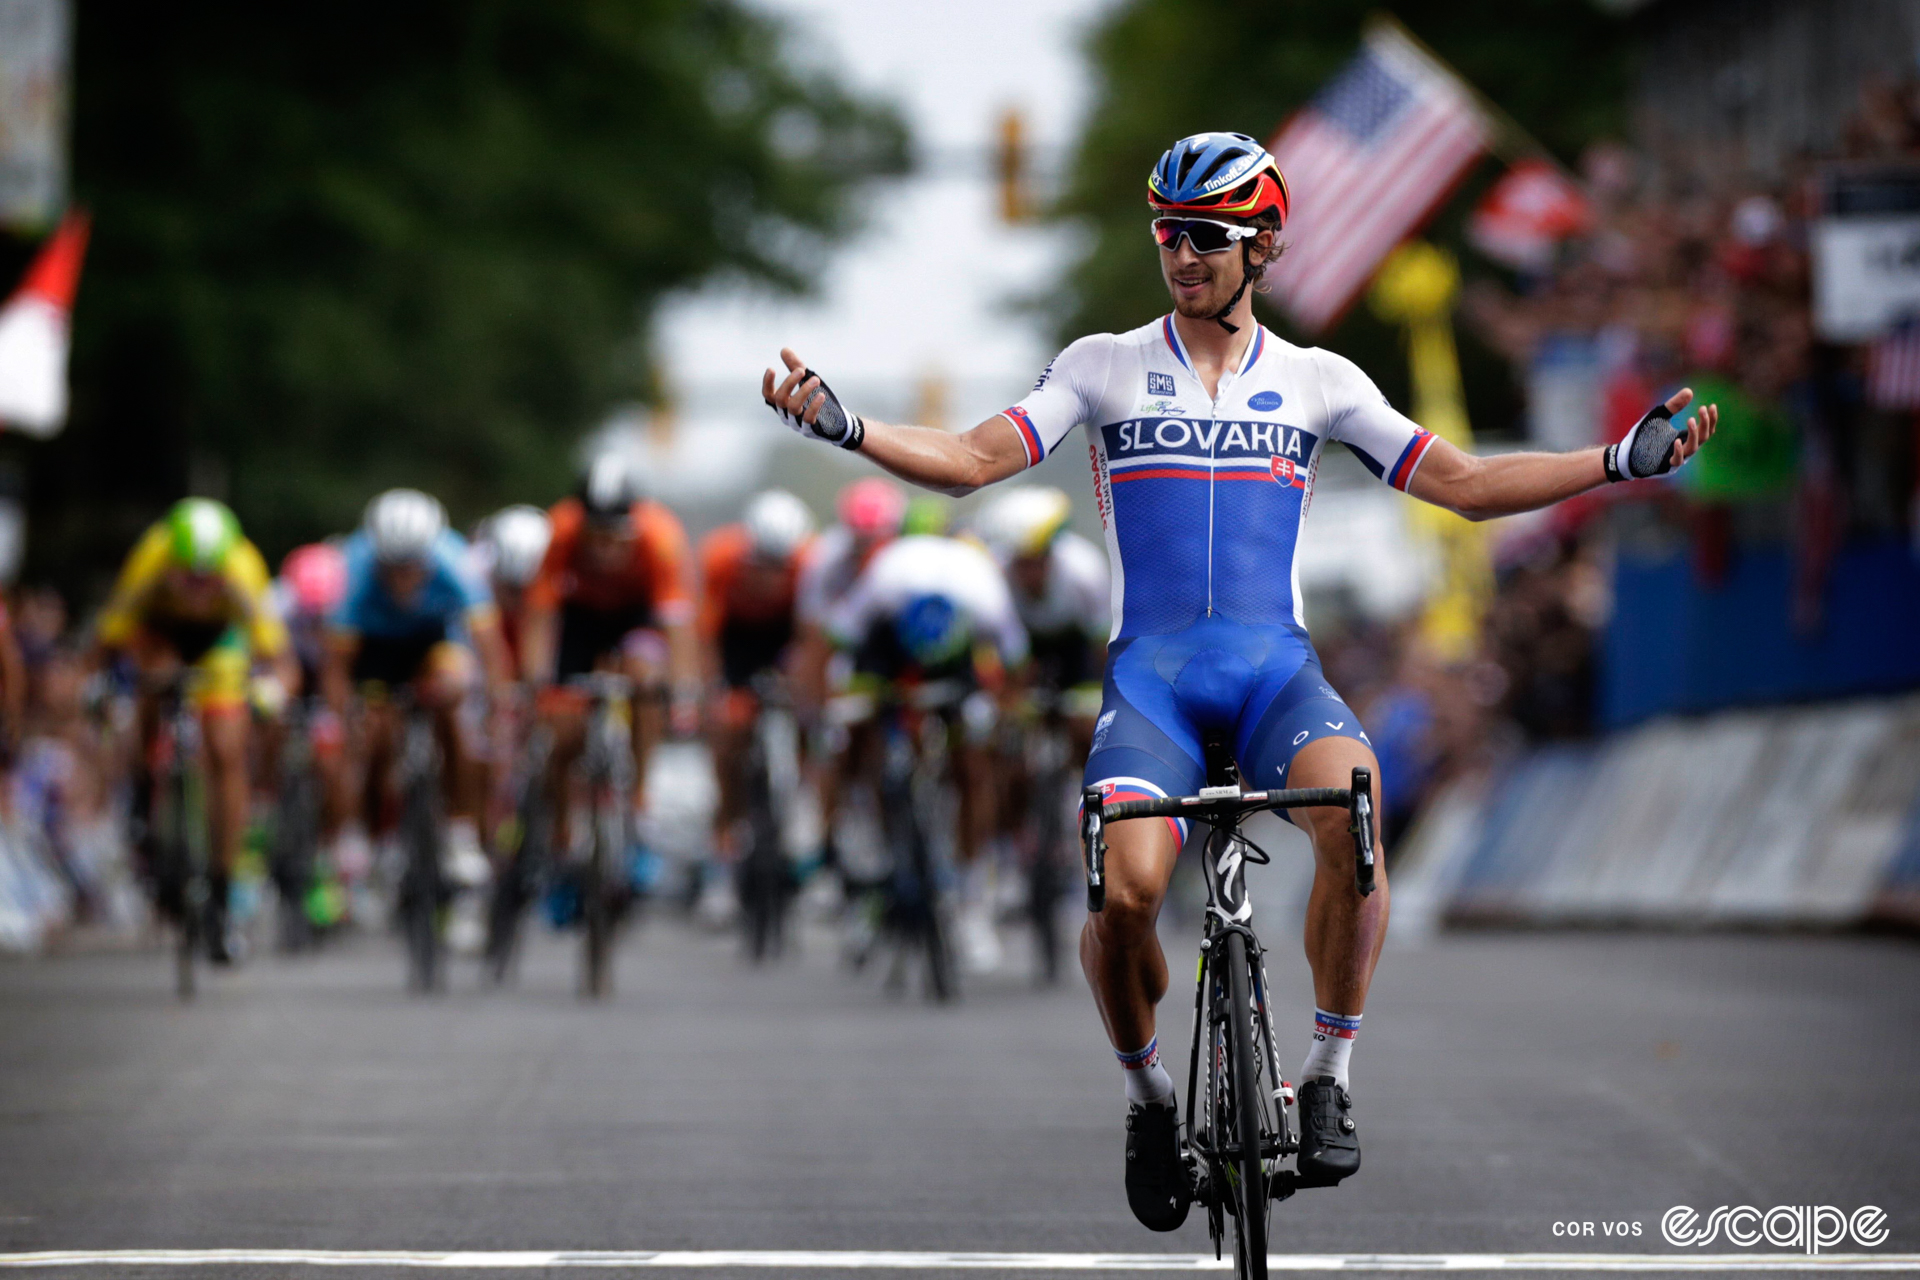 Peter Sagan celebrates winning the 2015 world road title with both arms outstretched to his side.